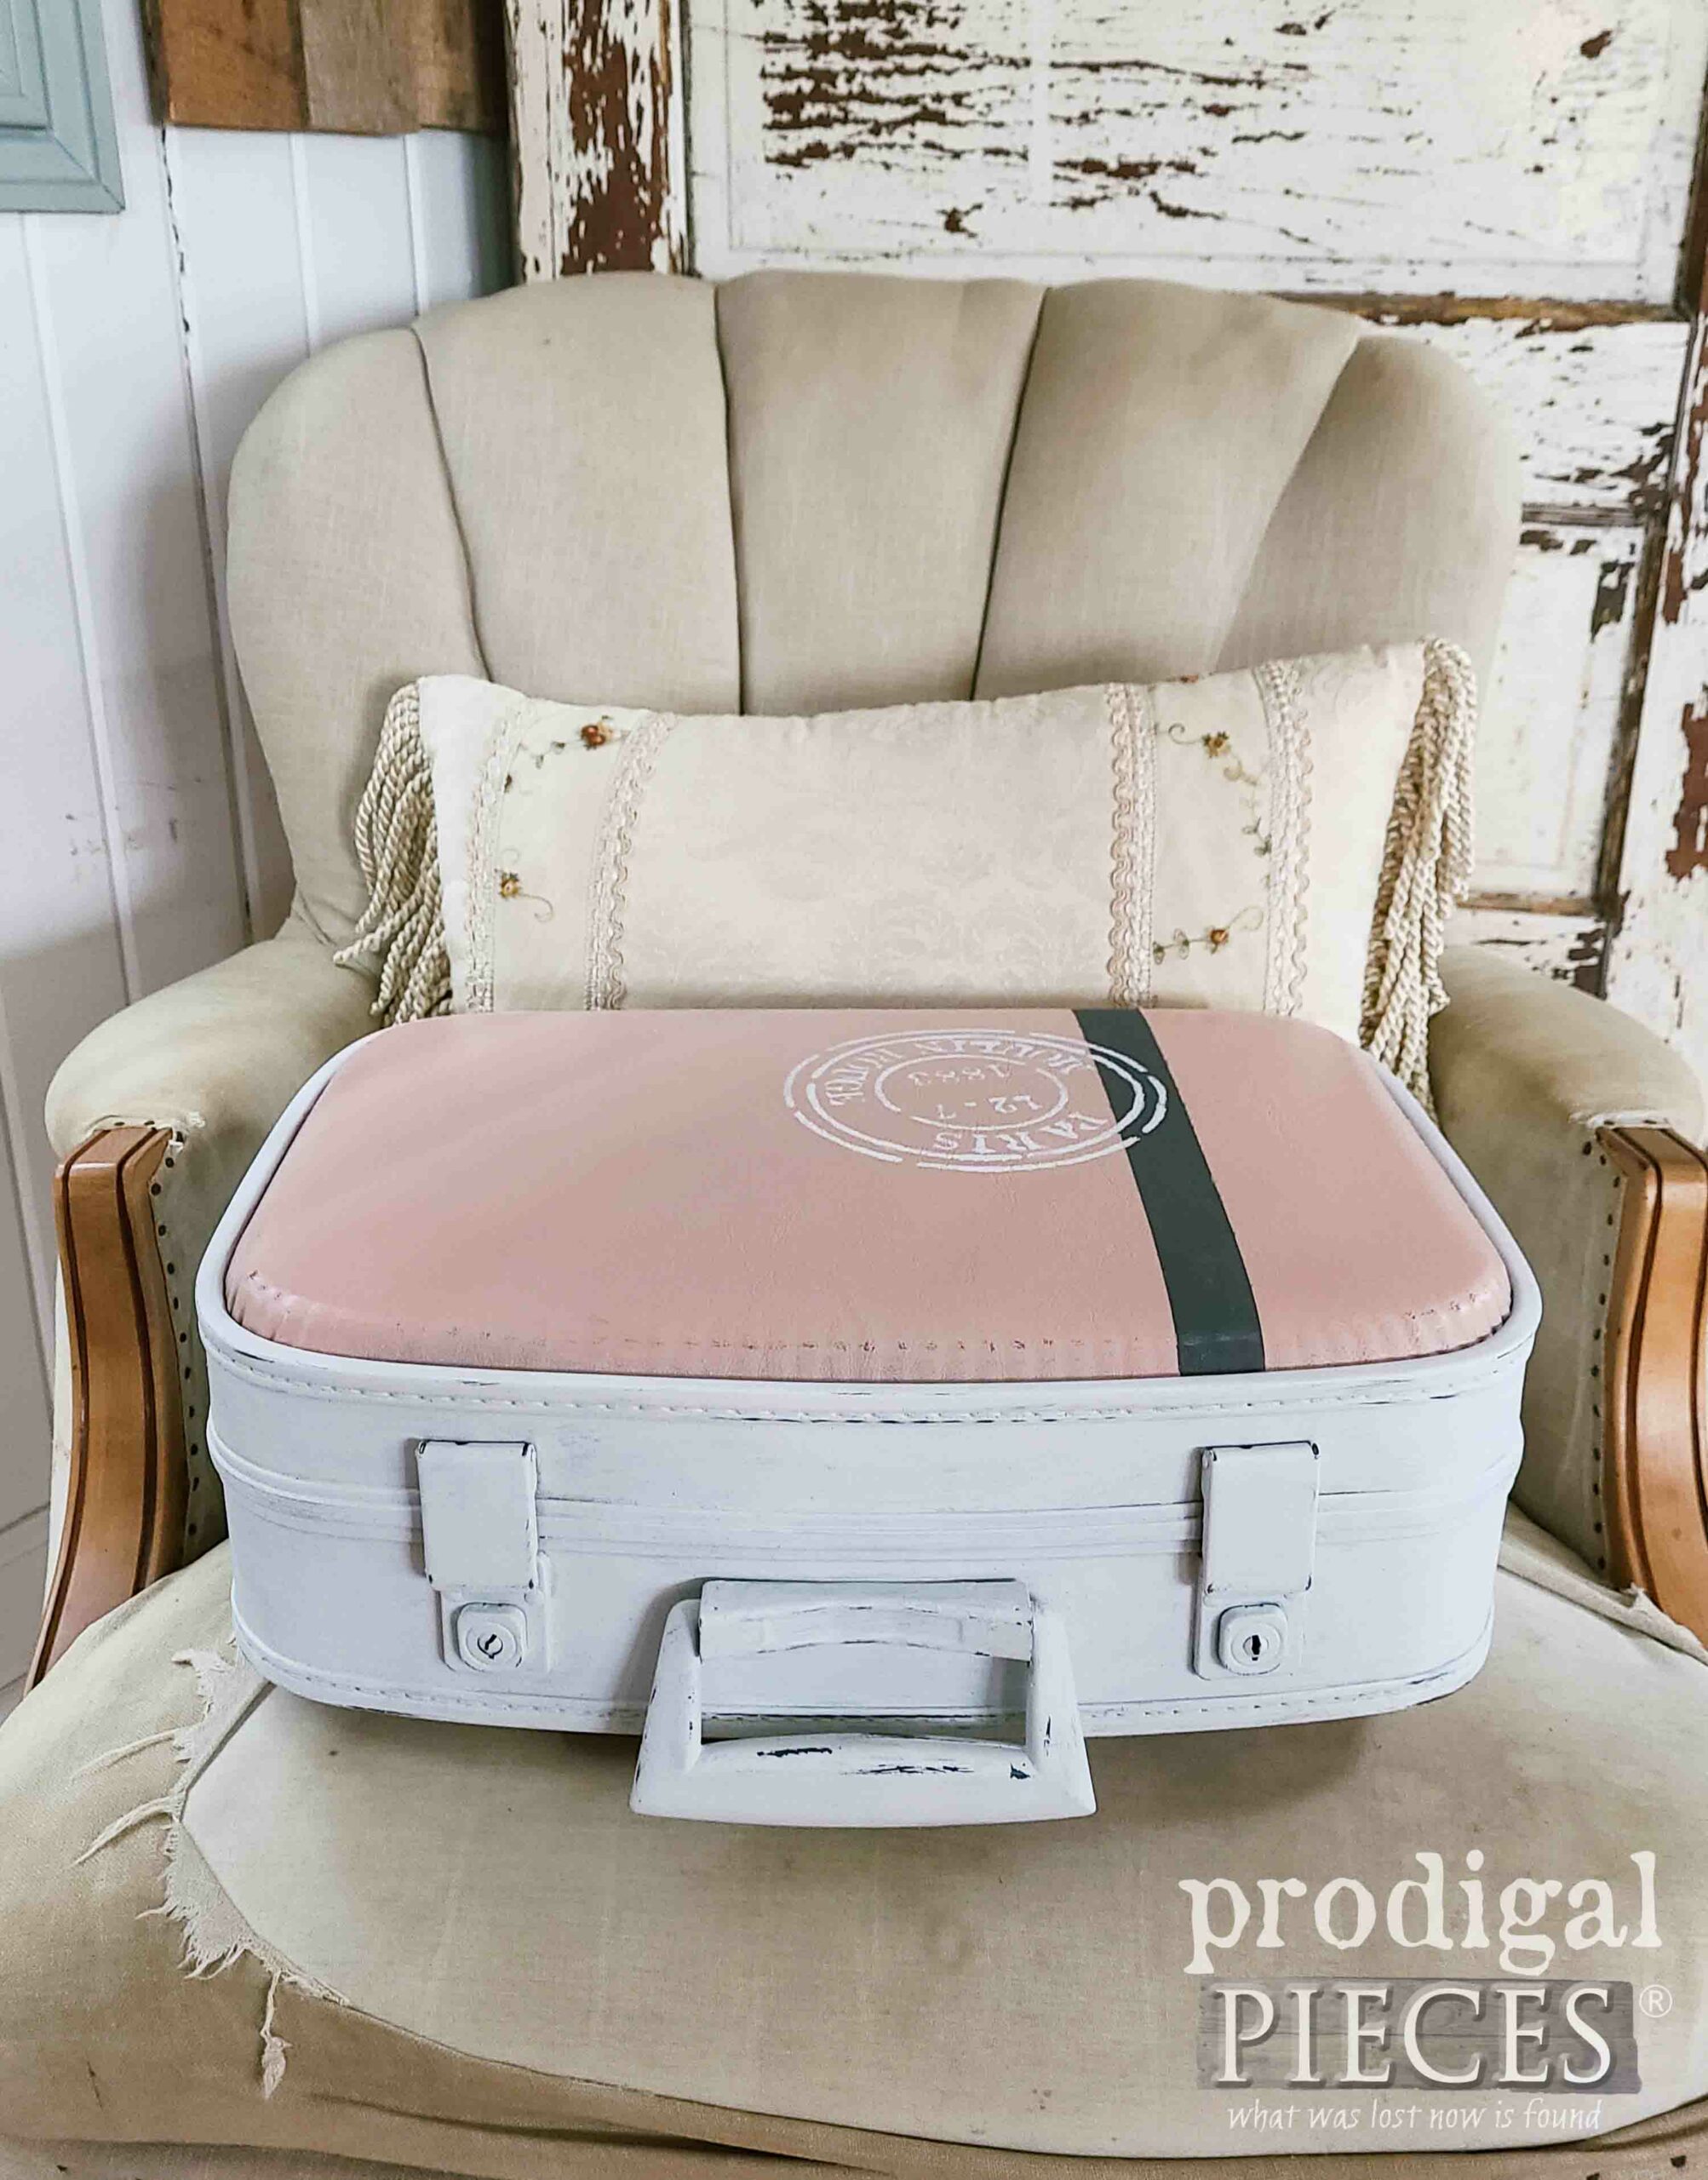 Pink and White Vintage Suitcase by Larissa of Prodigal Pieces | prodigalpieces.com #prodigalpieces